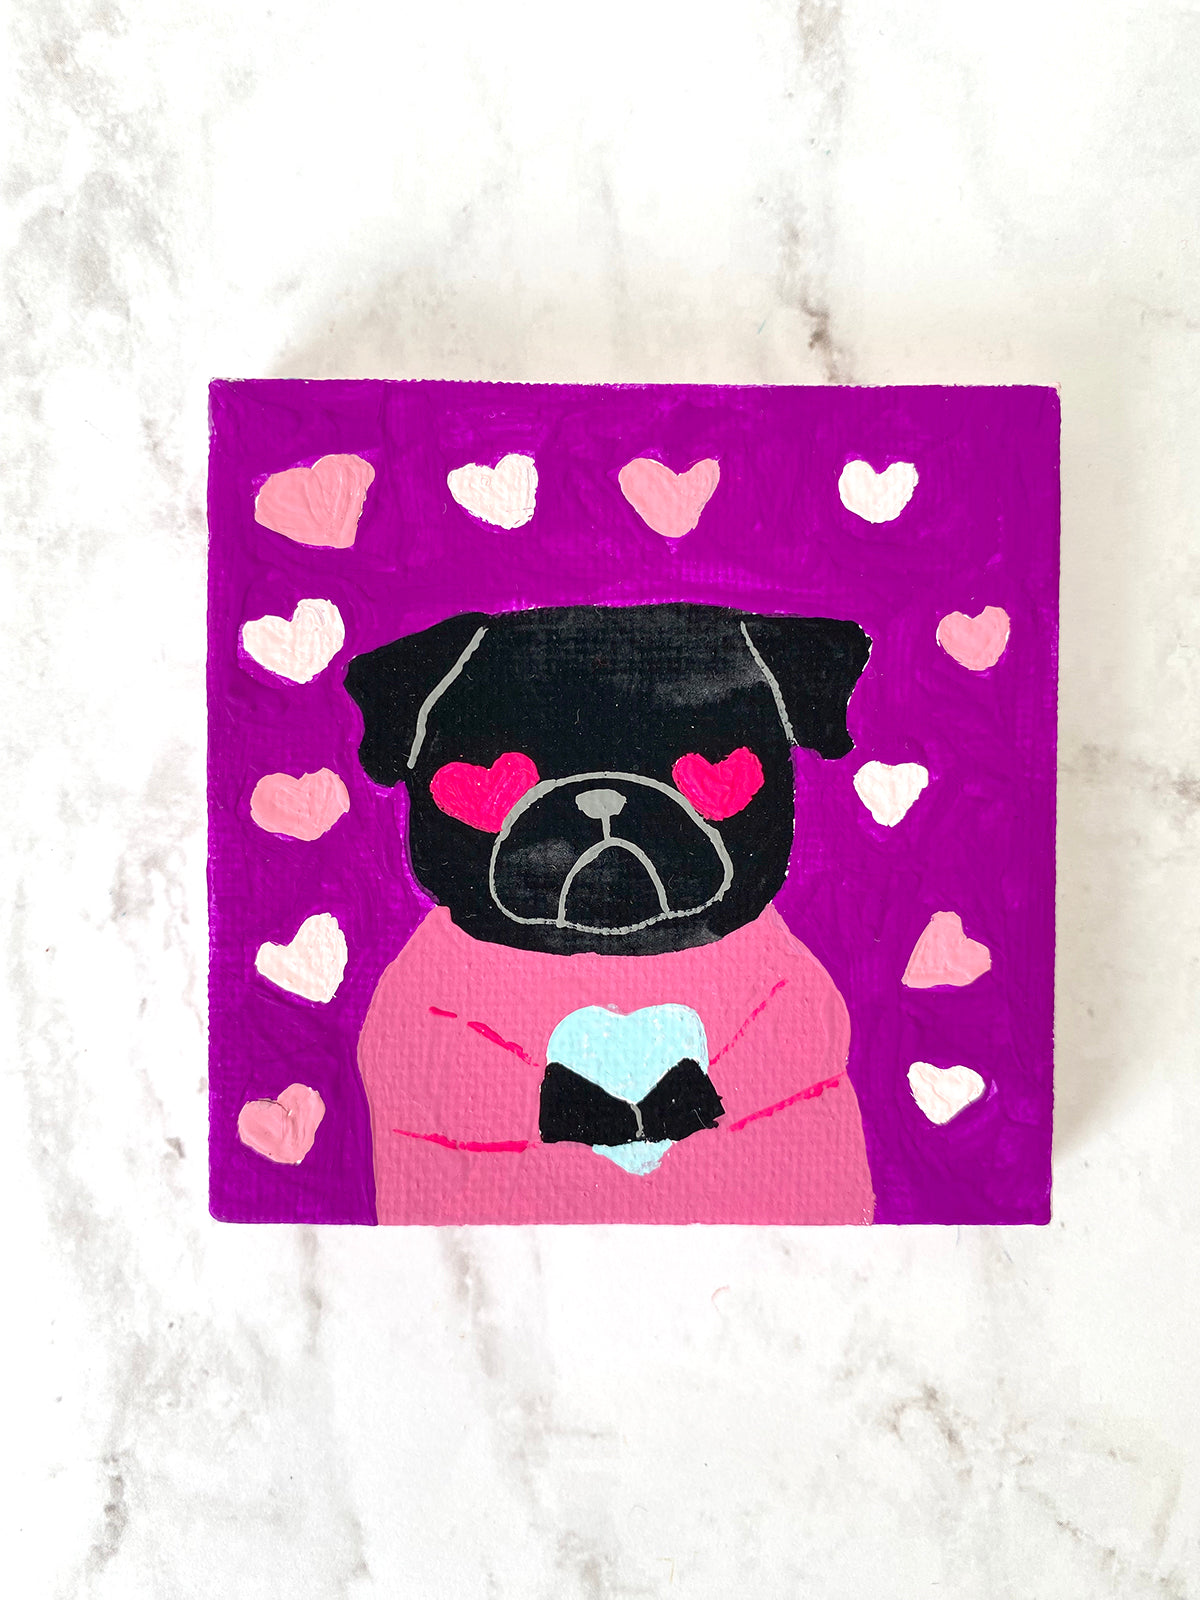 All The Hearts - 2023 Mini Painting Series - #25/48